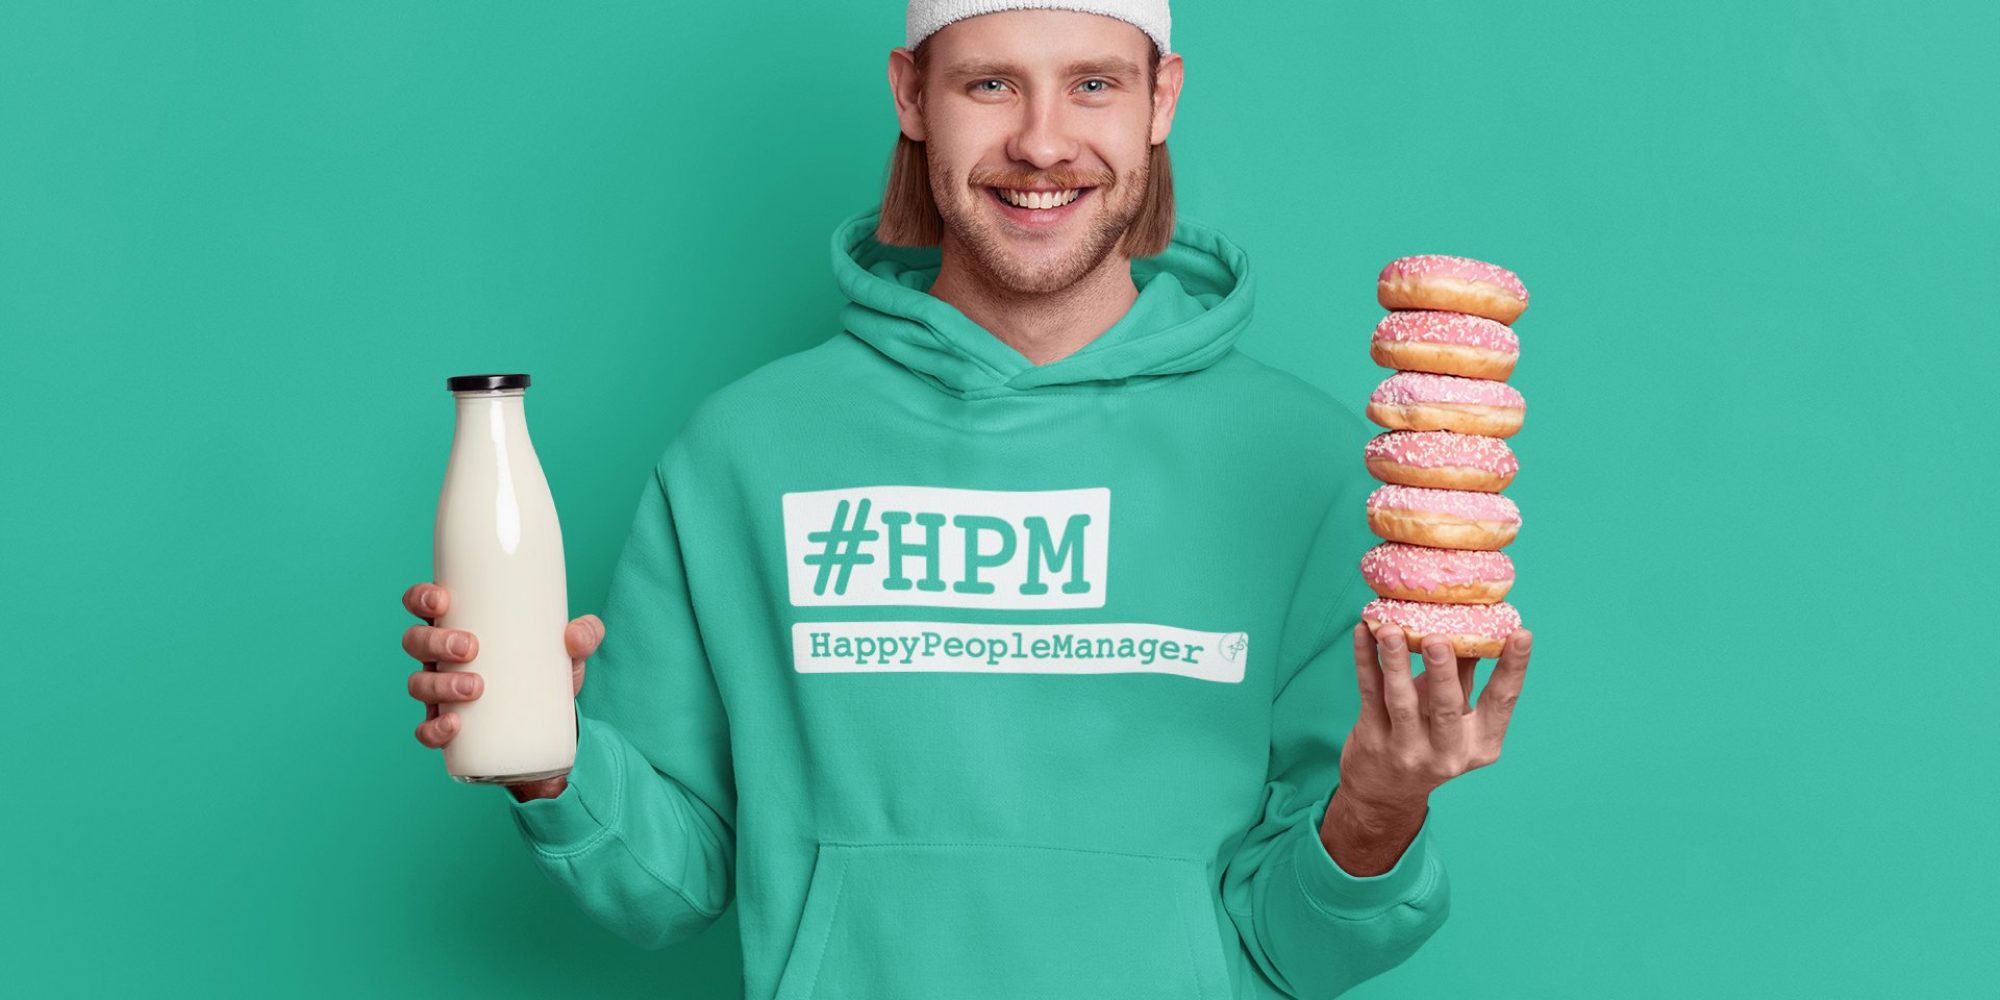 hoodie-mockup-of-a-man-holding-some-milk-and-donuts-m3730-r-el2